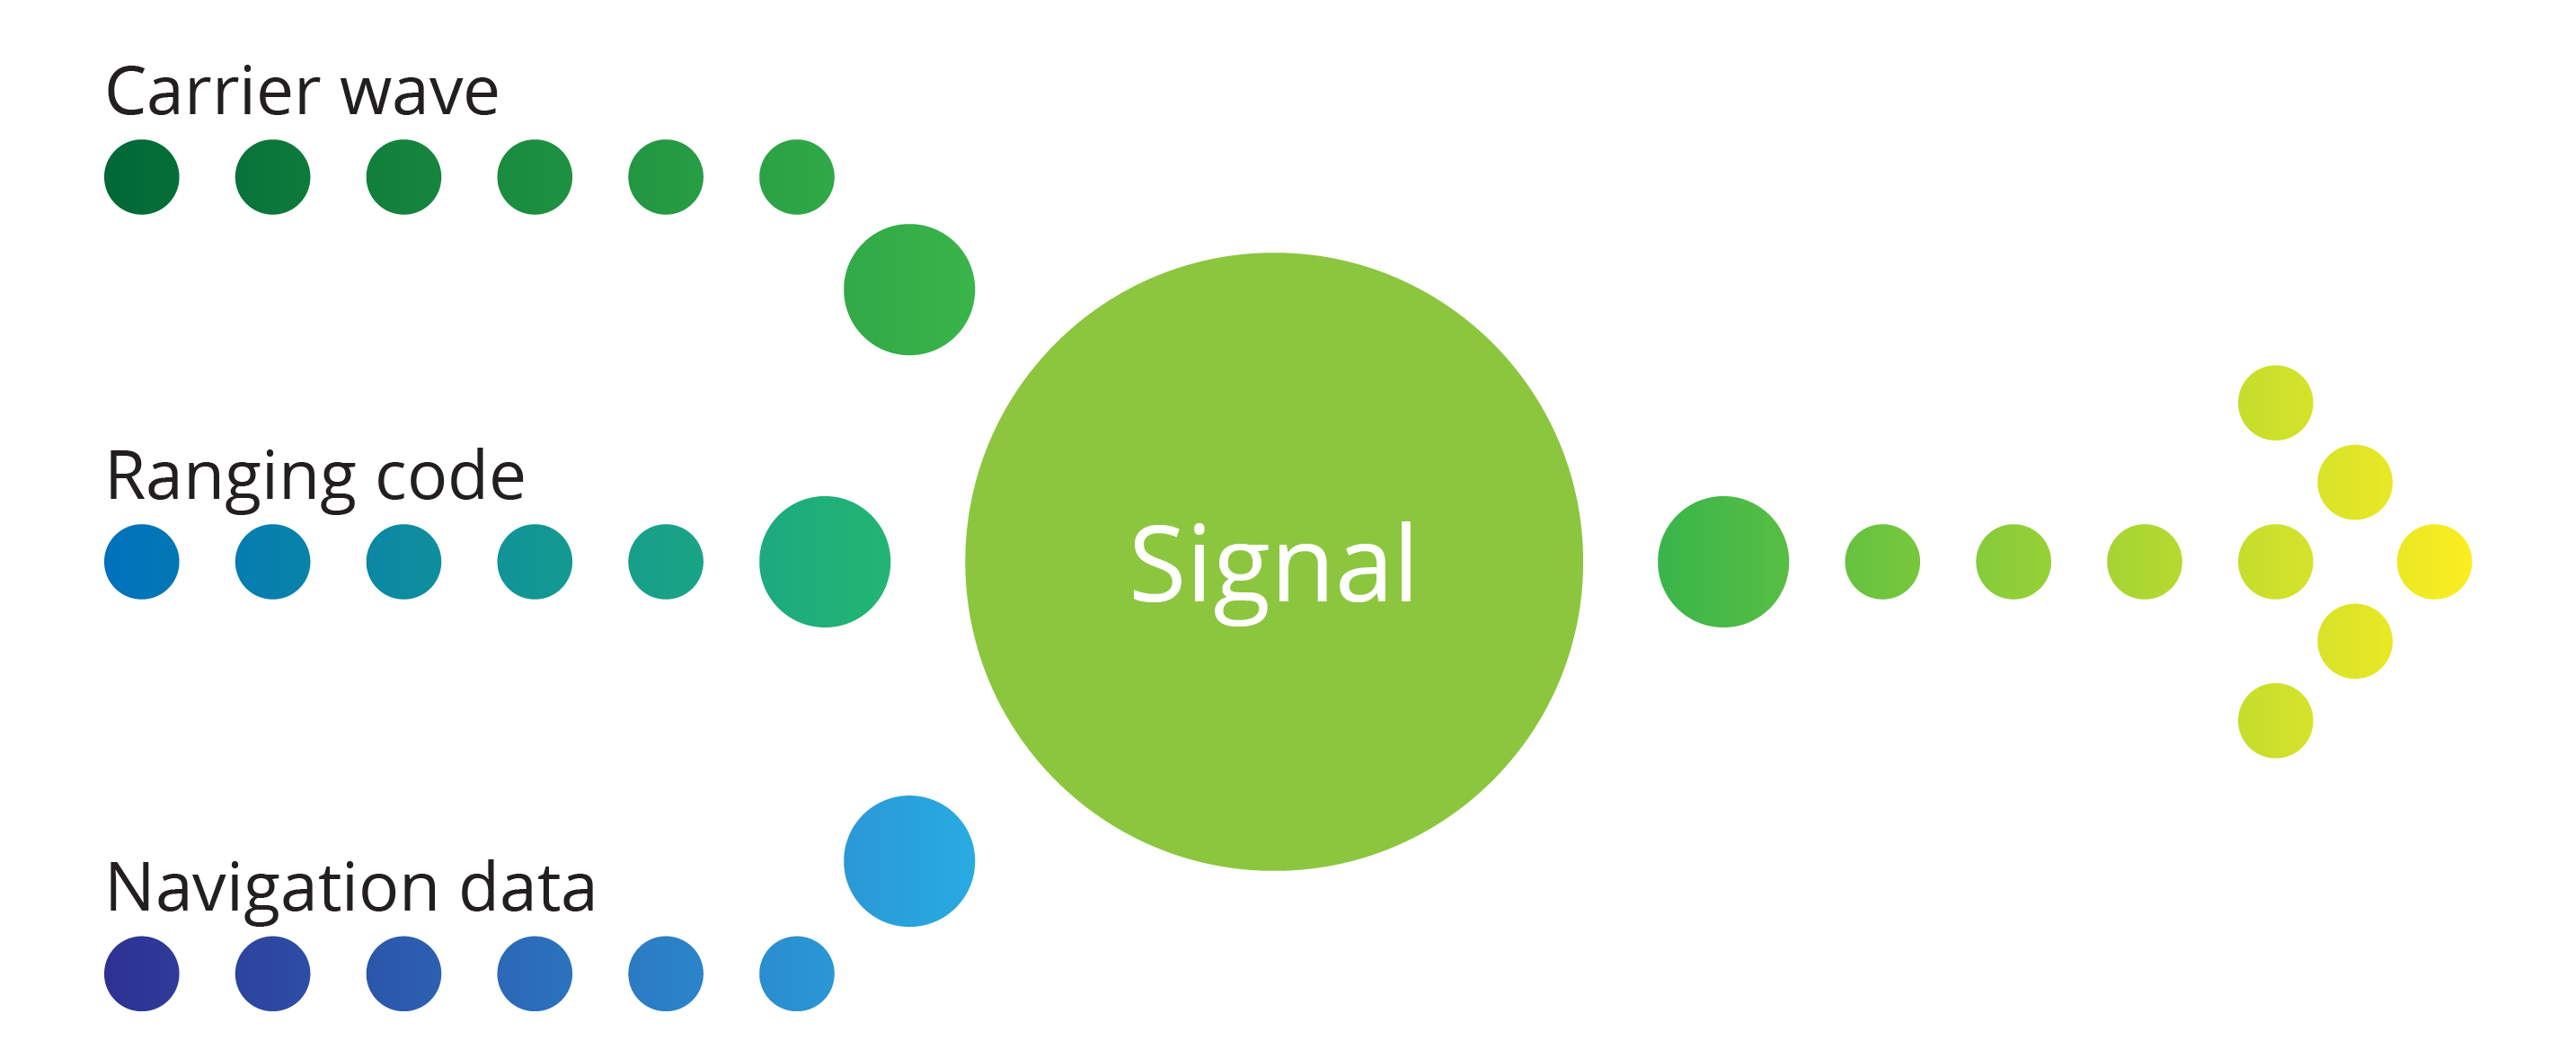 Green circle with the word signal, with attached dots to the words carrier wave, ranging code and navigation data